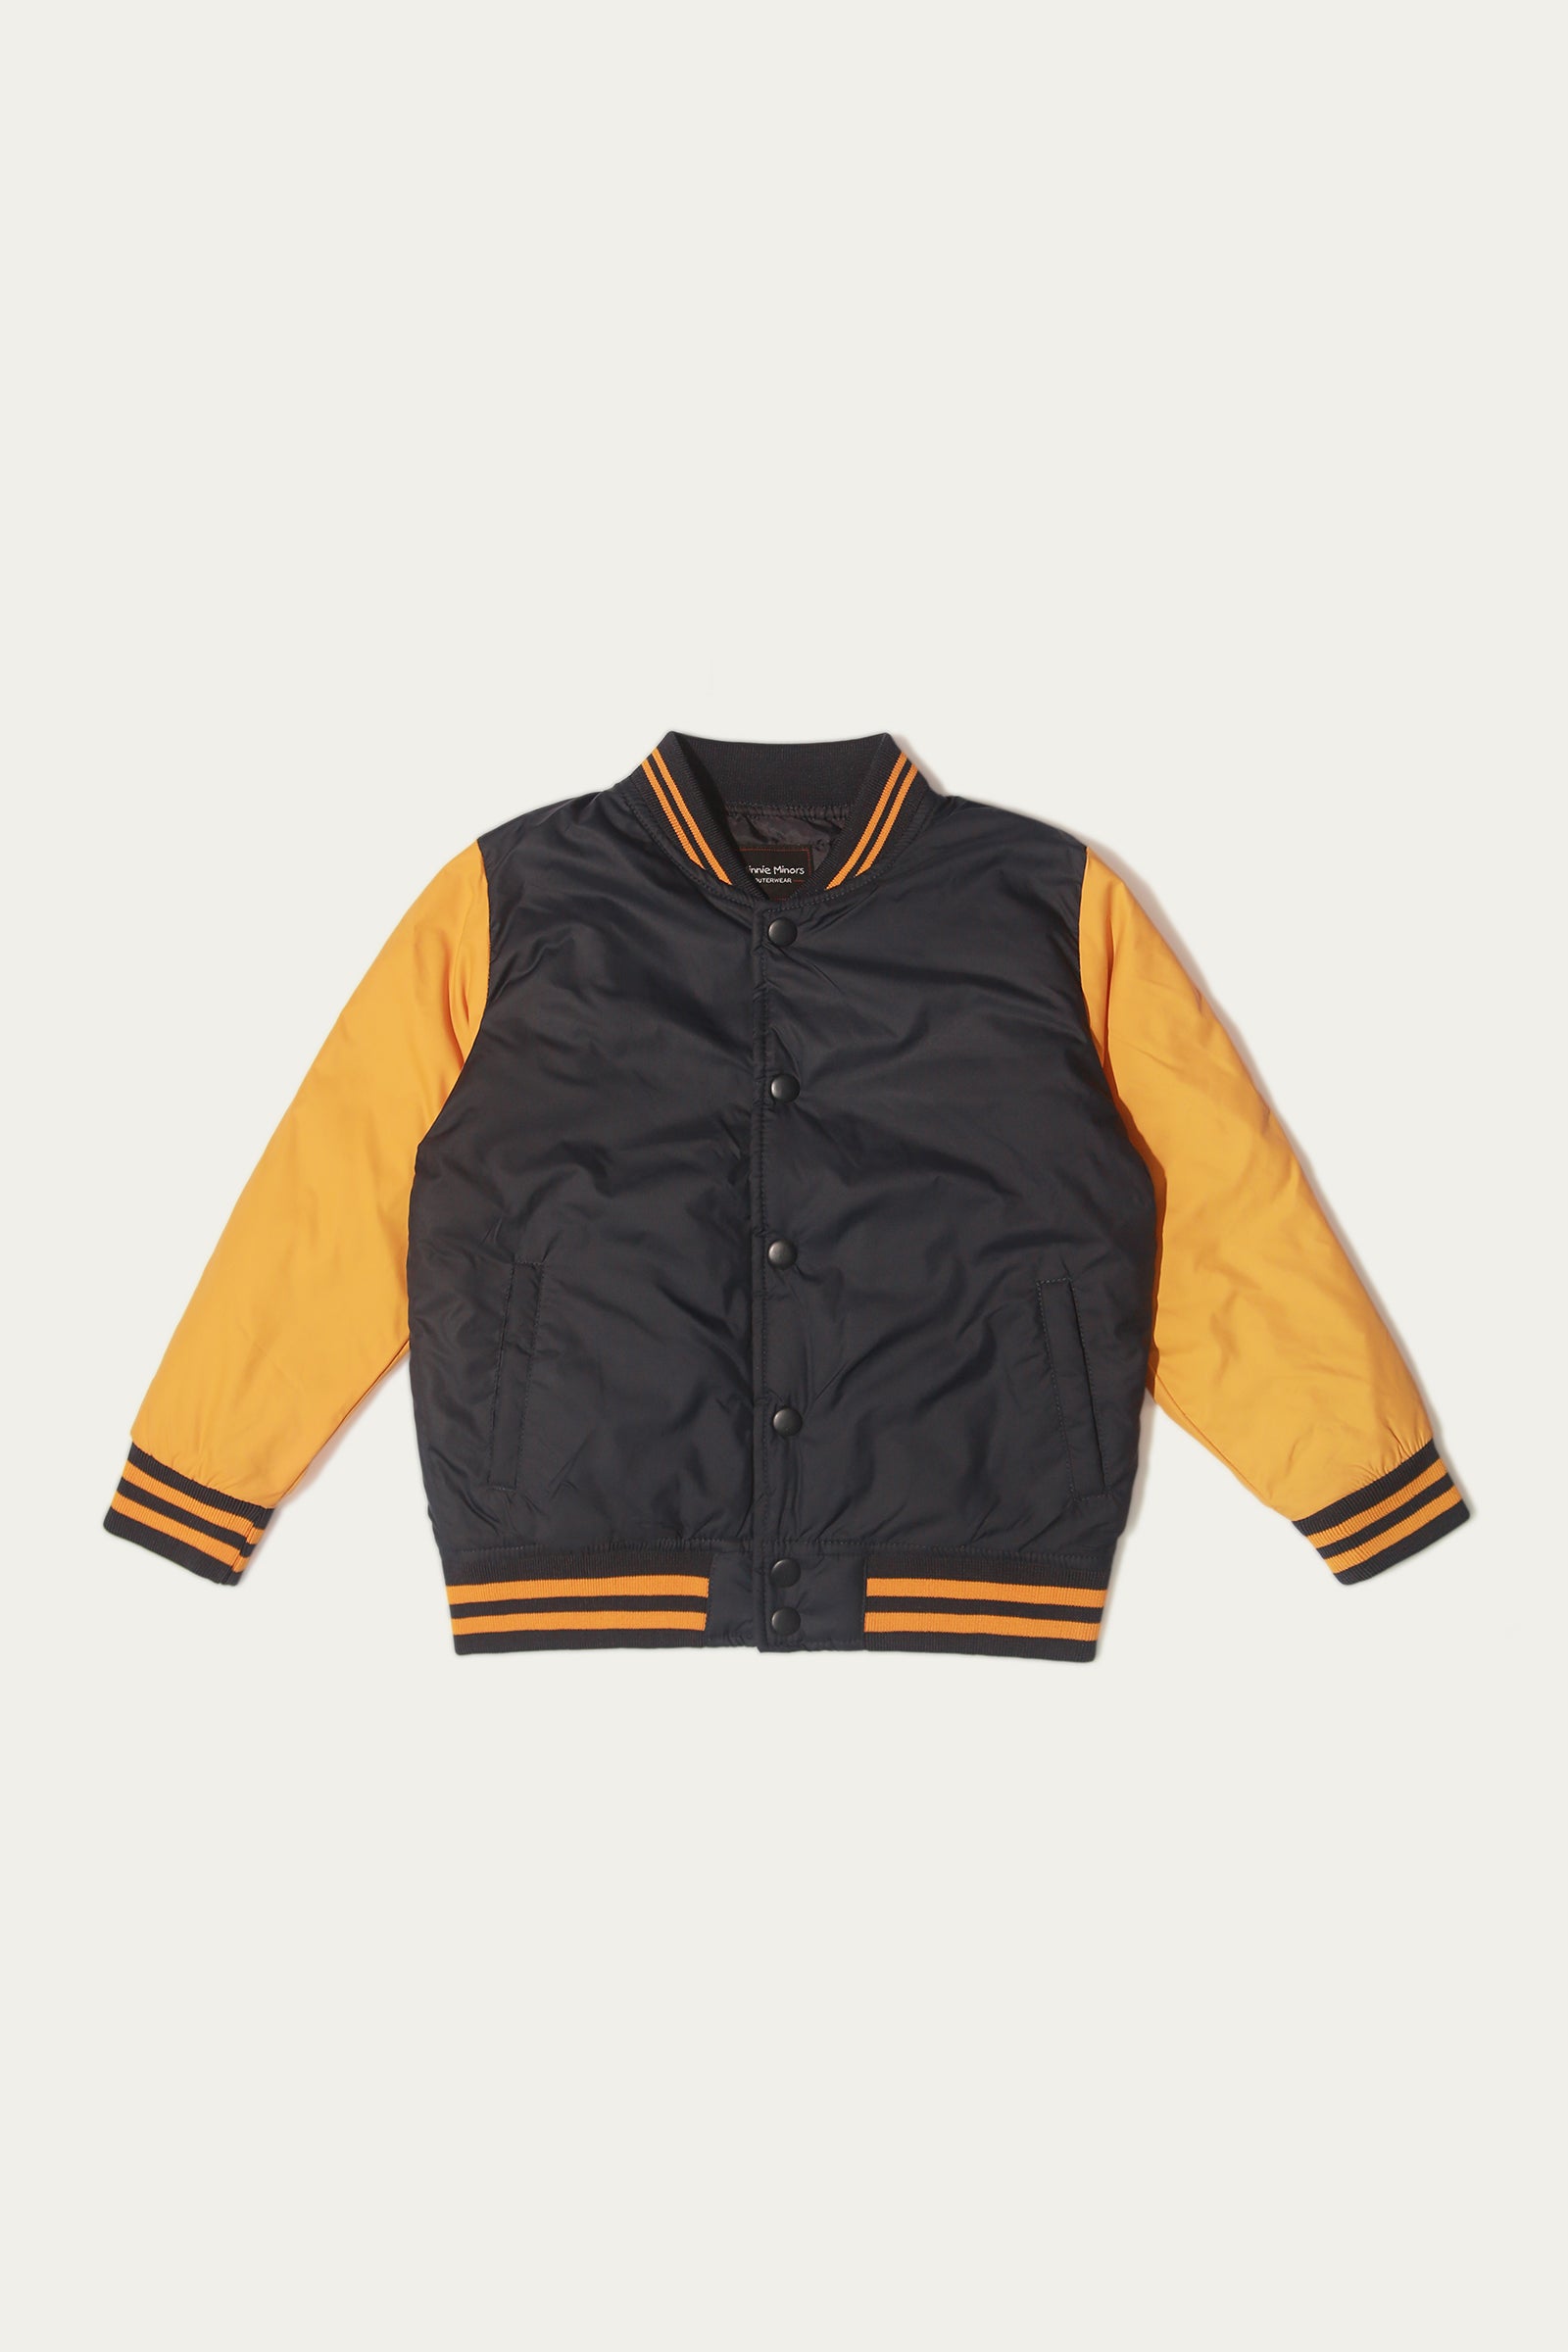 Jacket With Rib Collar - Soft Parachute | Navy &Amp; Mustard - Best Kids Clothing Brands In Pakistan Online|Minnie Minors